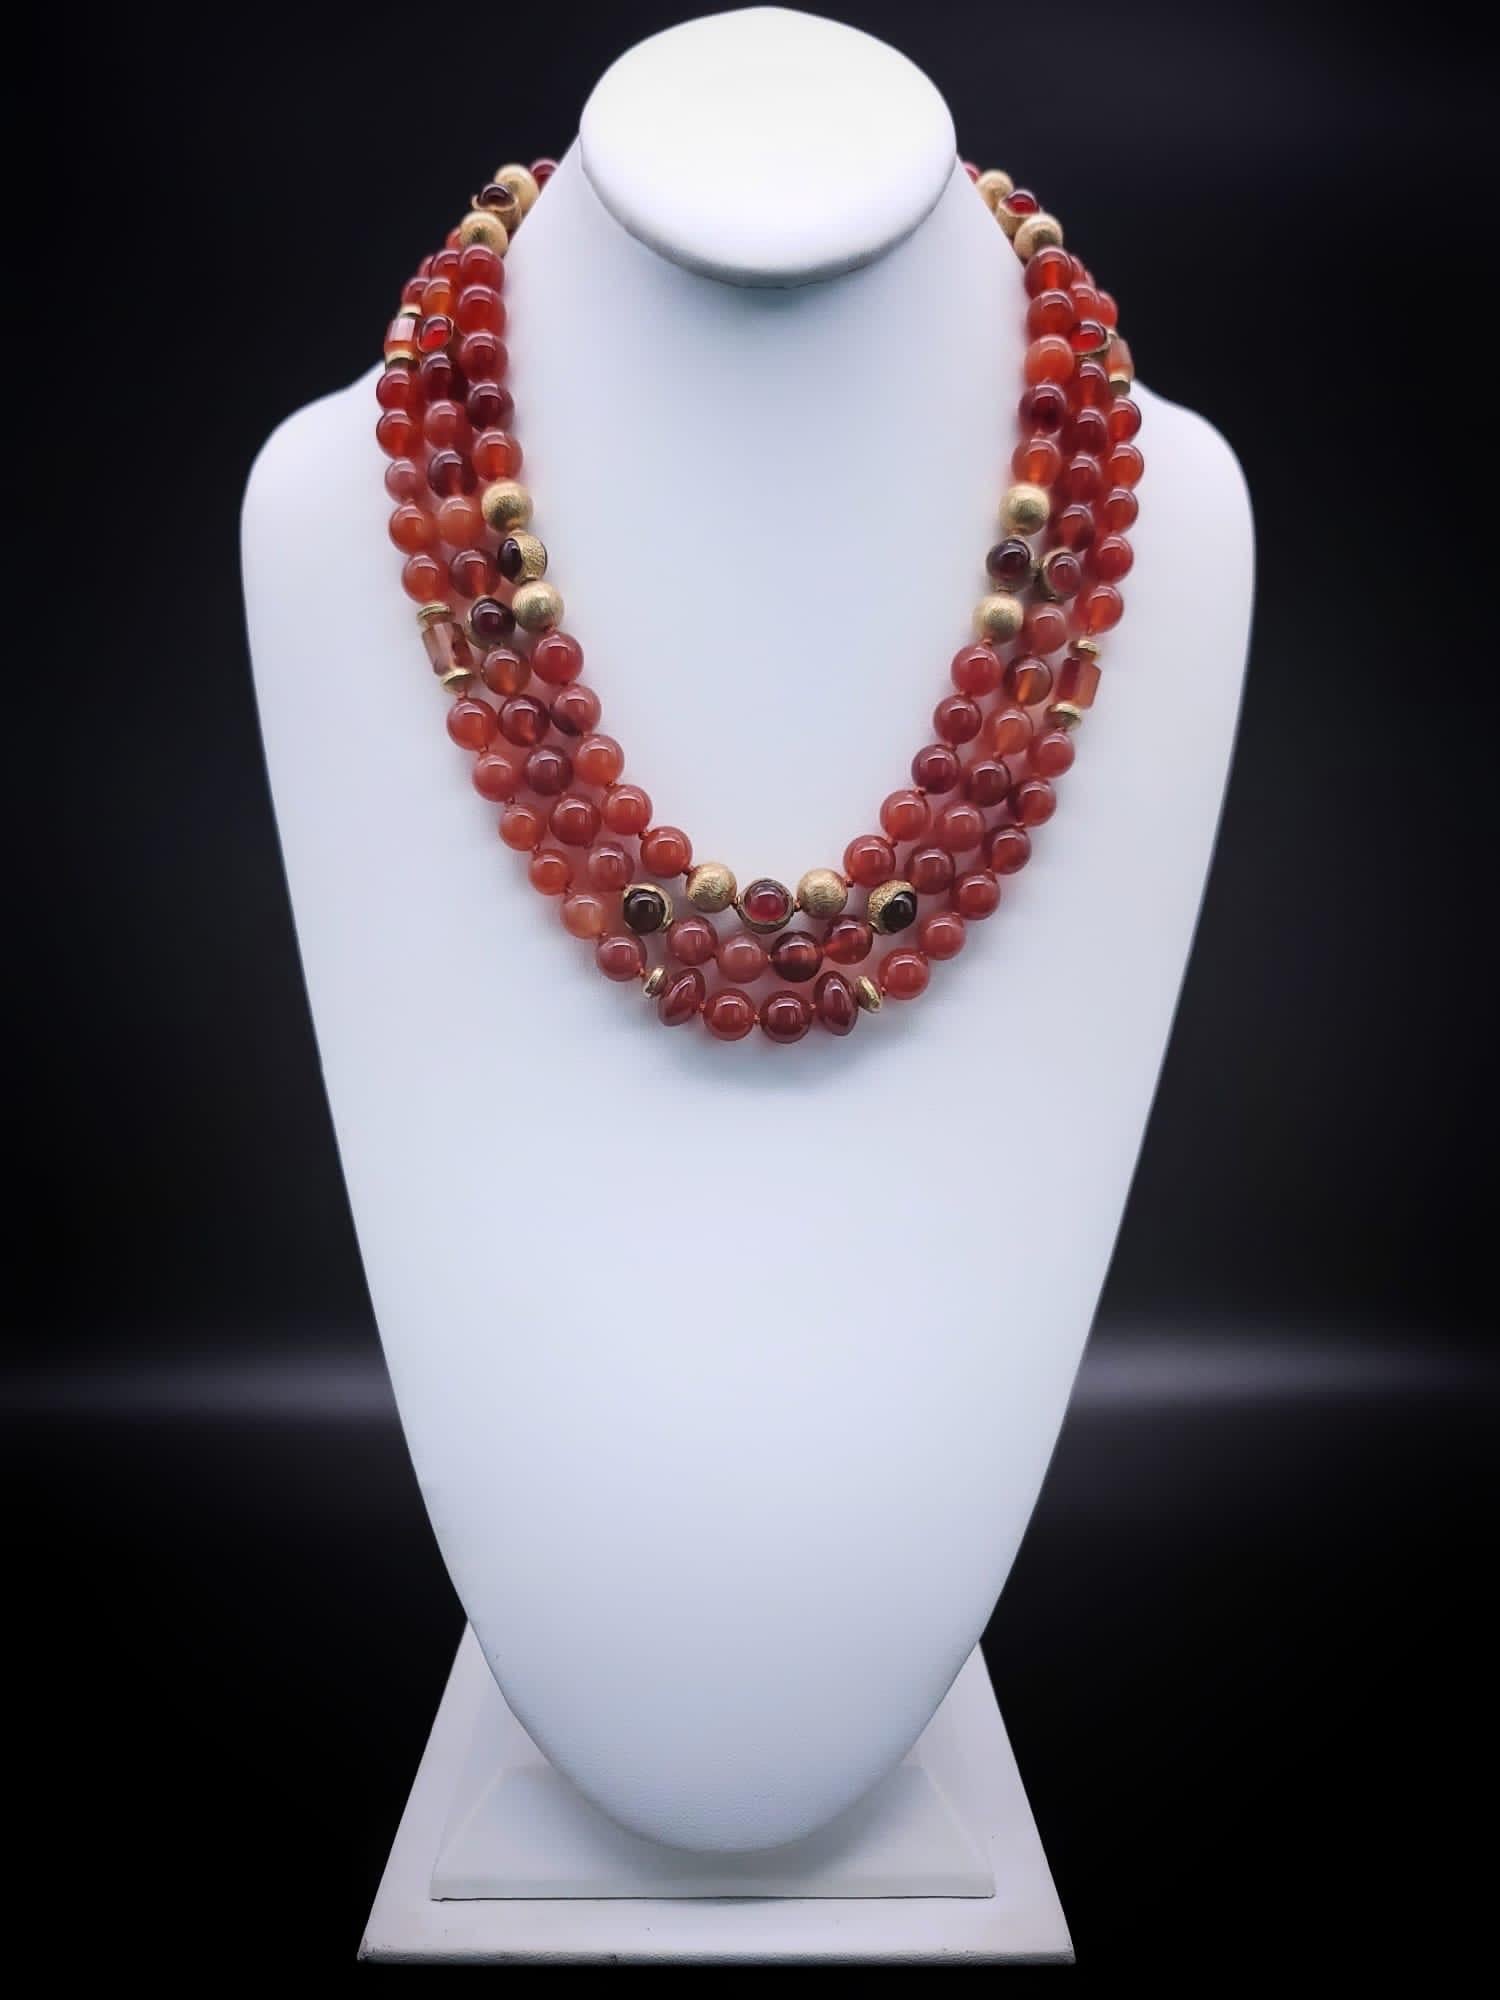 One-of-a-Kind

Take control in a power necklace.
3 strands of polished 10 m.m polished Carnelian translucent beads. Accented with brushed vermeil gold beads, as well as Carnelian beads that have been encircled by vermeil. The interesting clasp is a